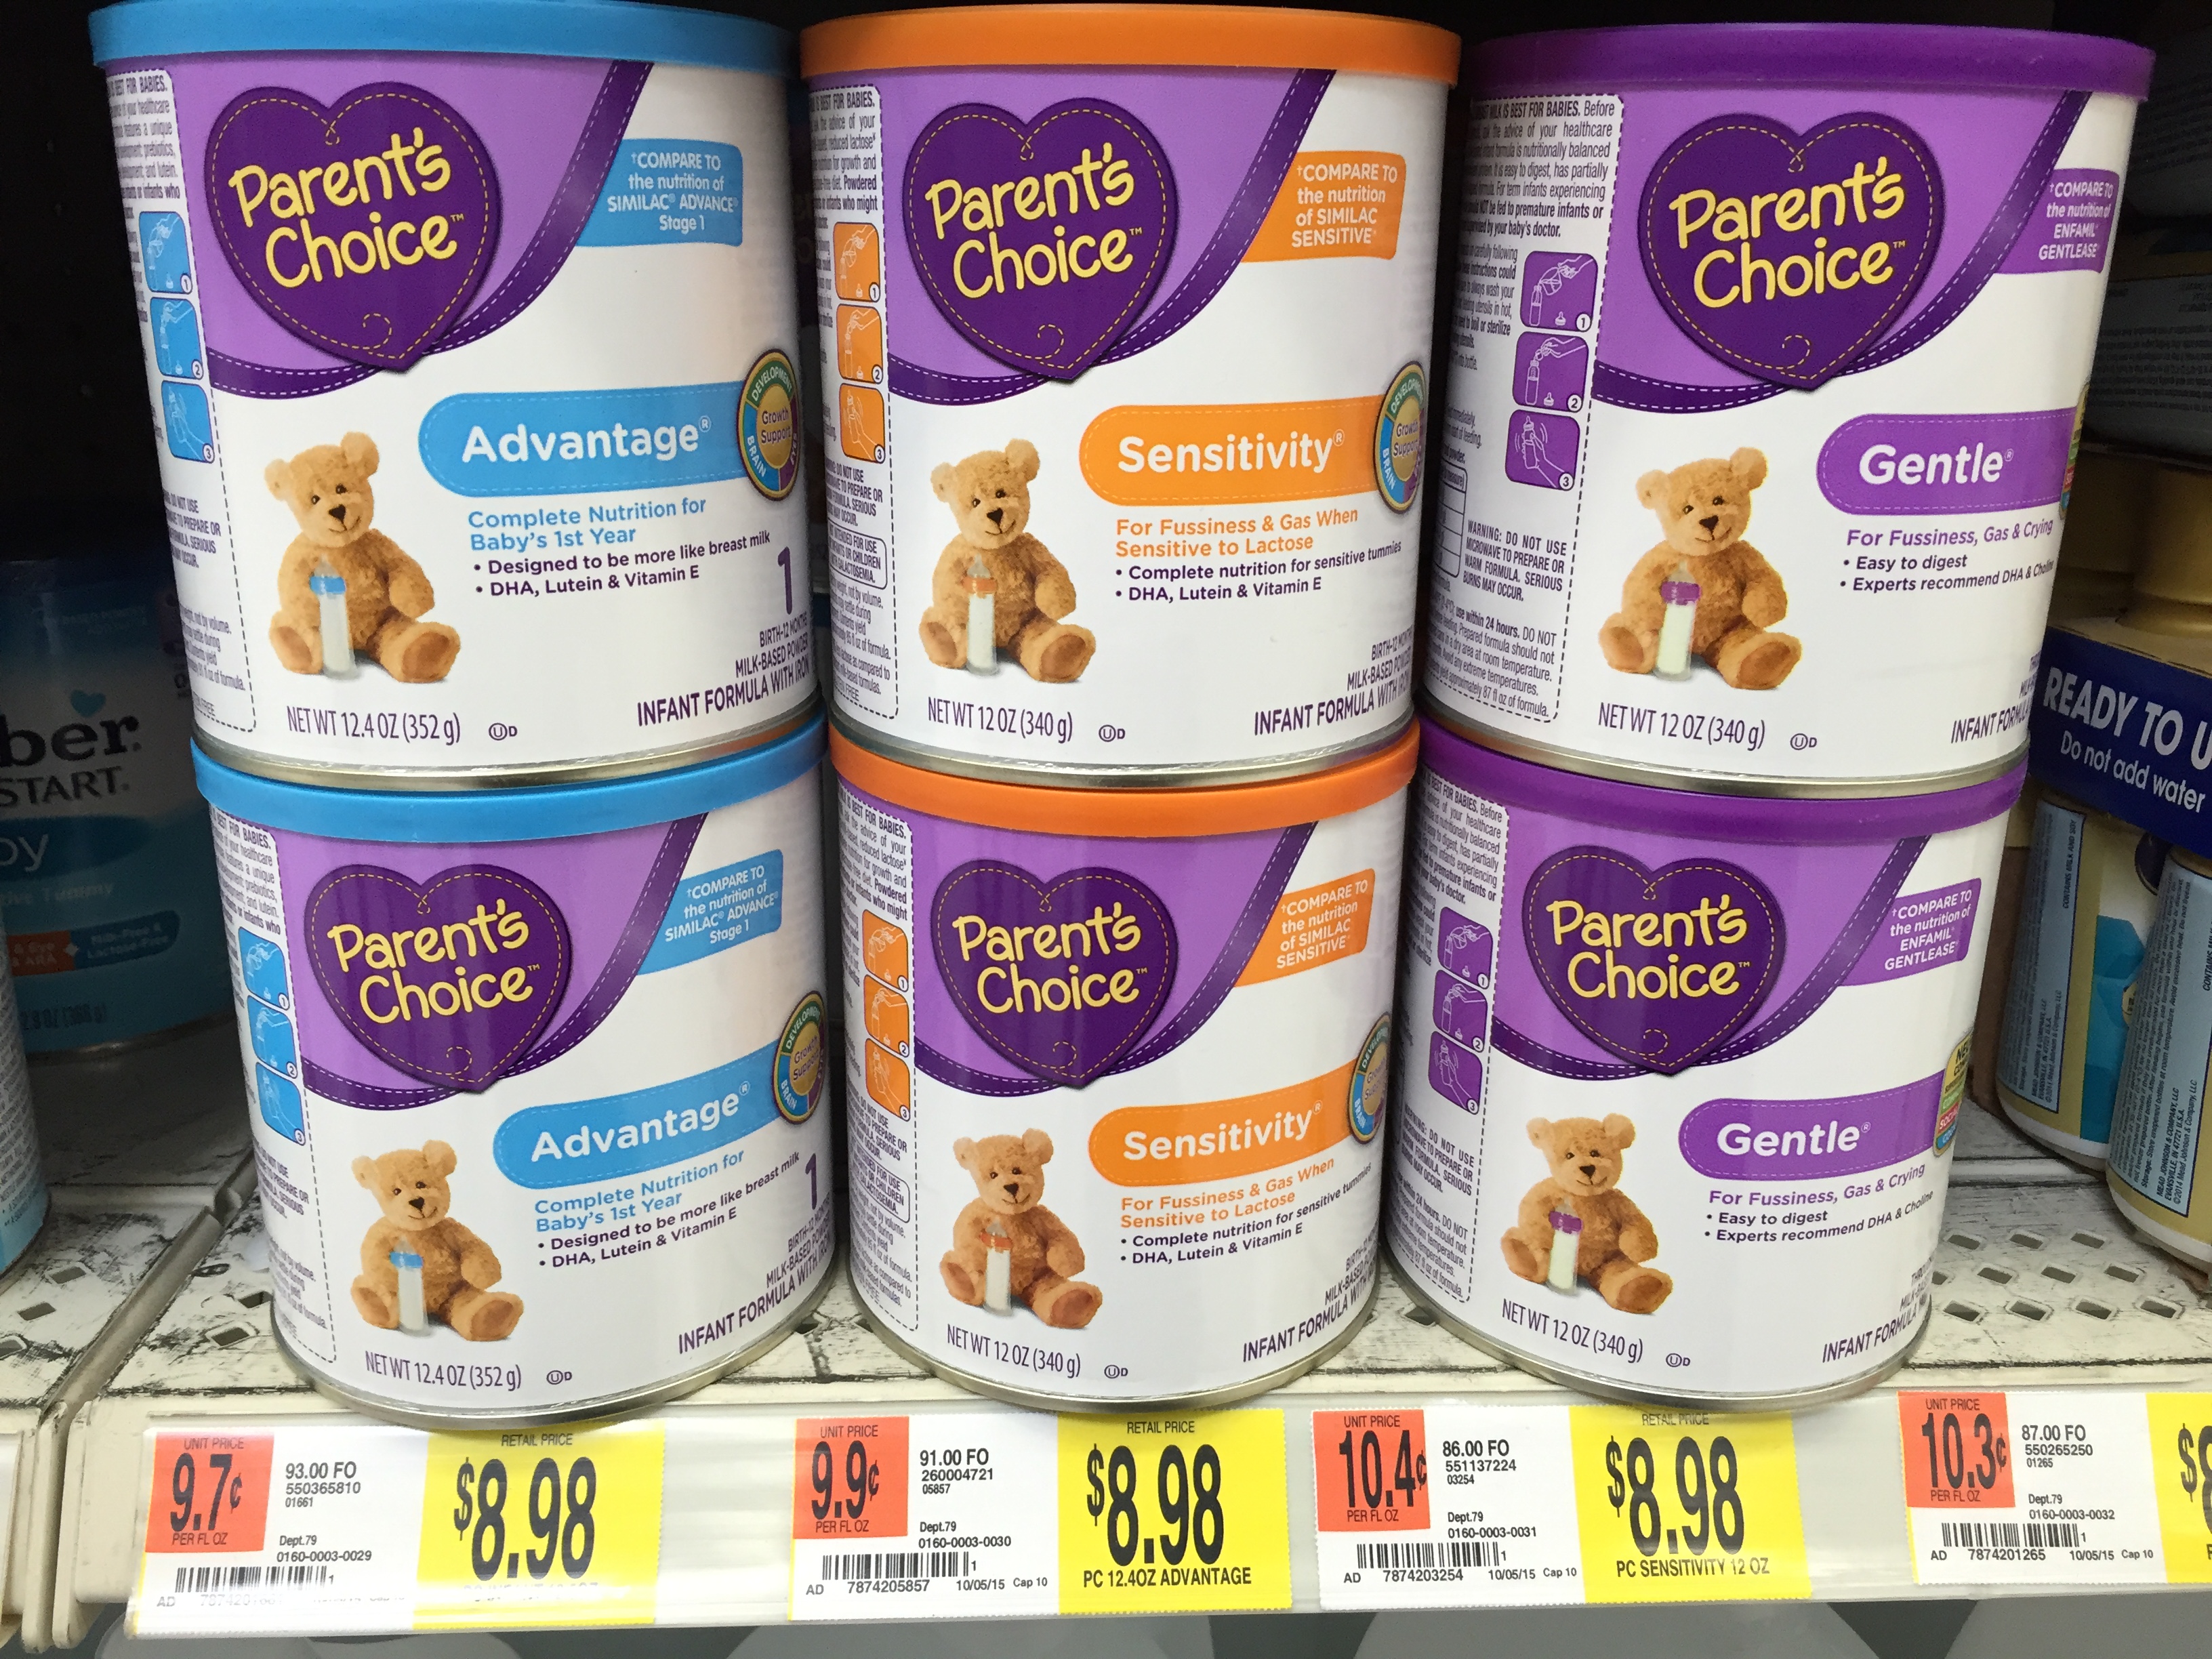 Win a $20 Walmart eGift Card in Parent's Choice Sweepstakes